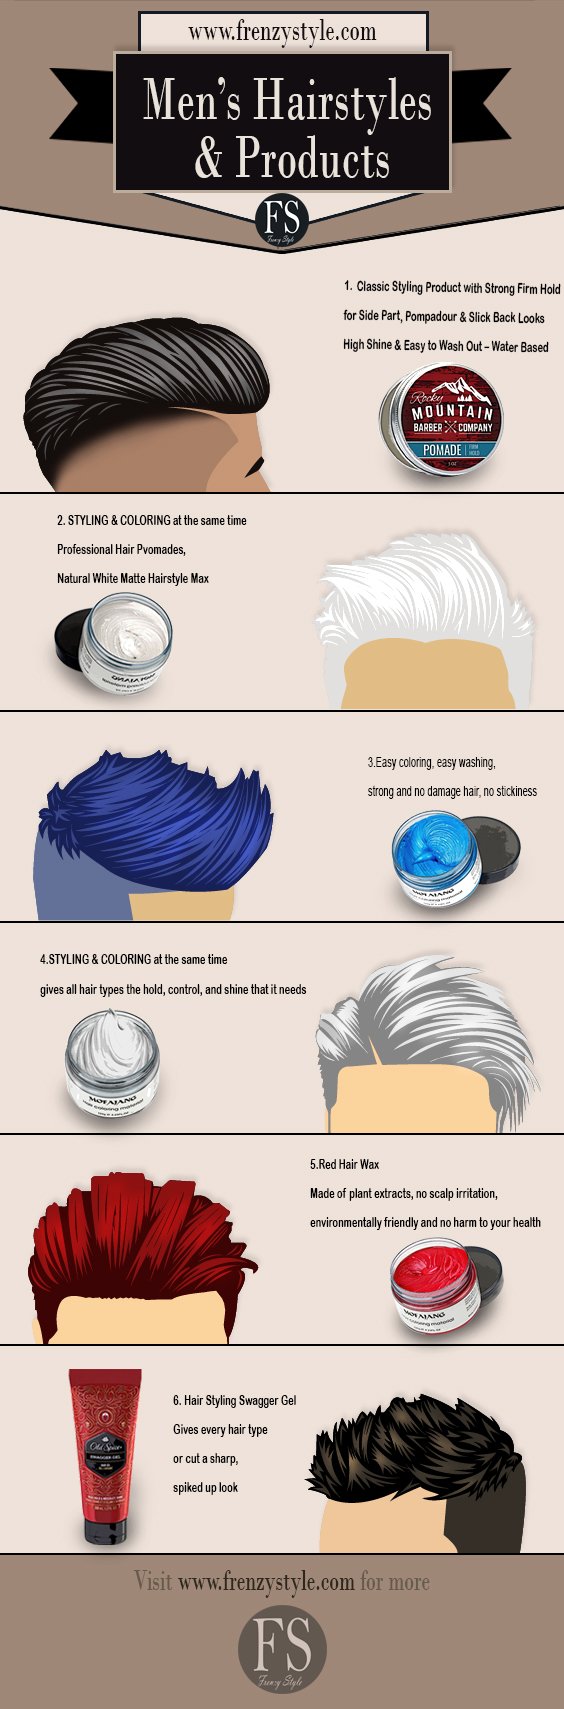 6 Popular Men's Hairstyles and Haircuts and the products associated with them